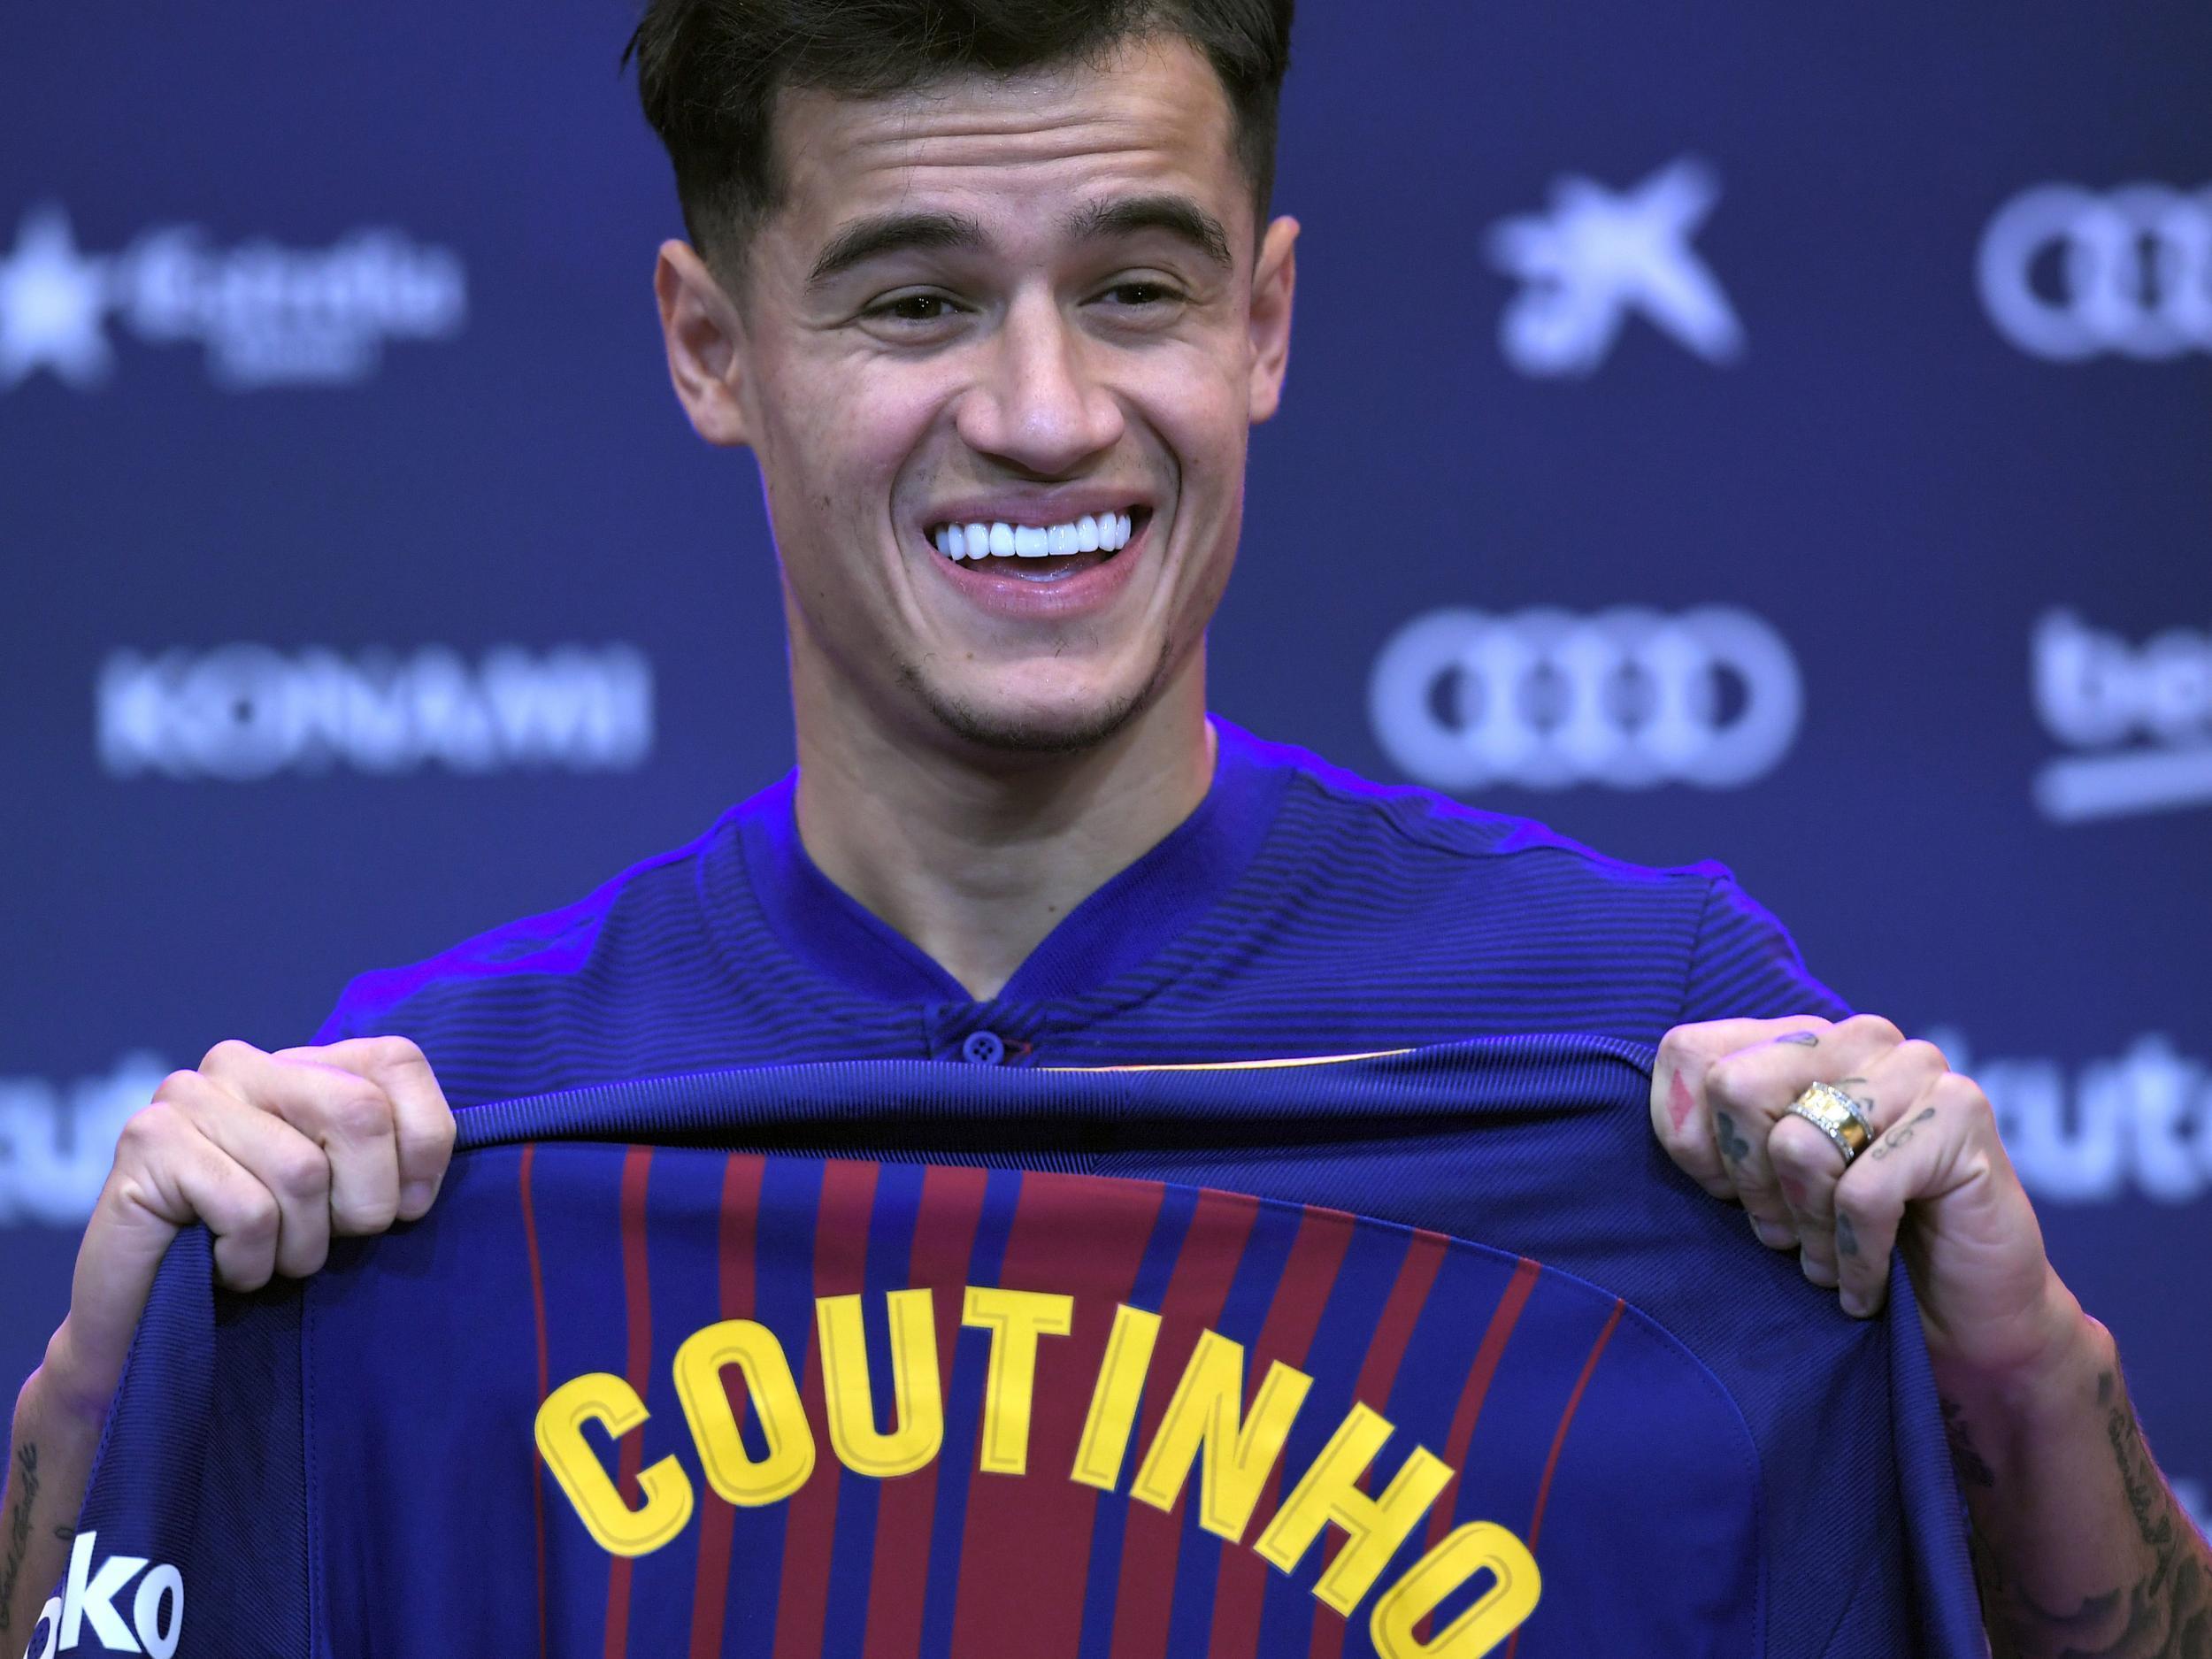 Philippe Coutinho to wear number 14 shirt at Barcelona